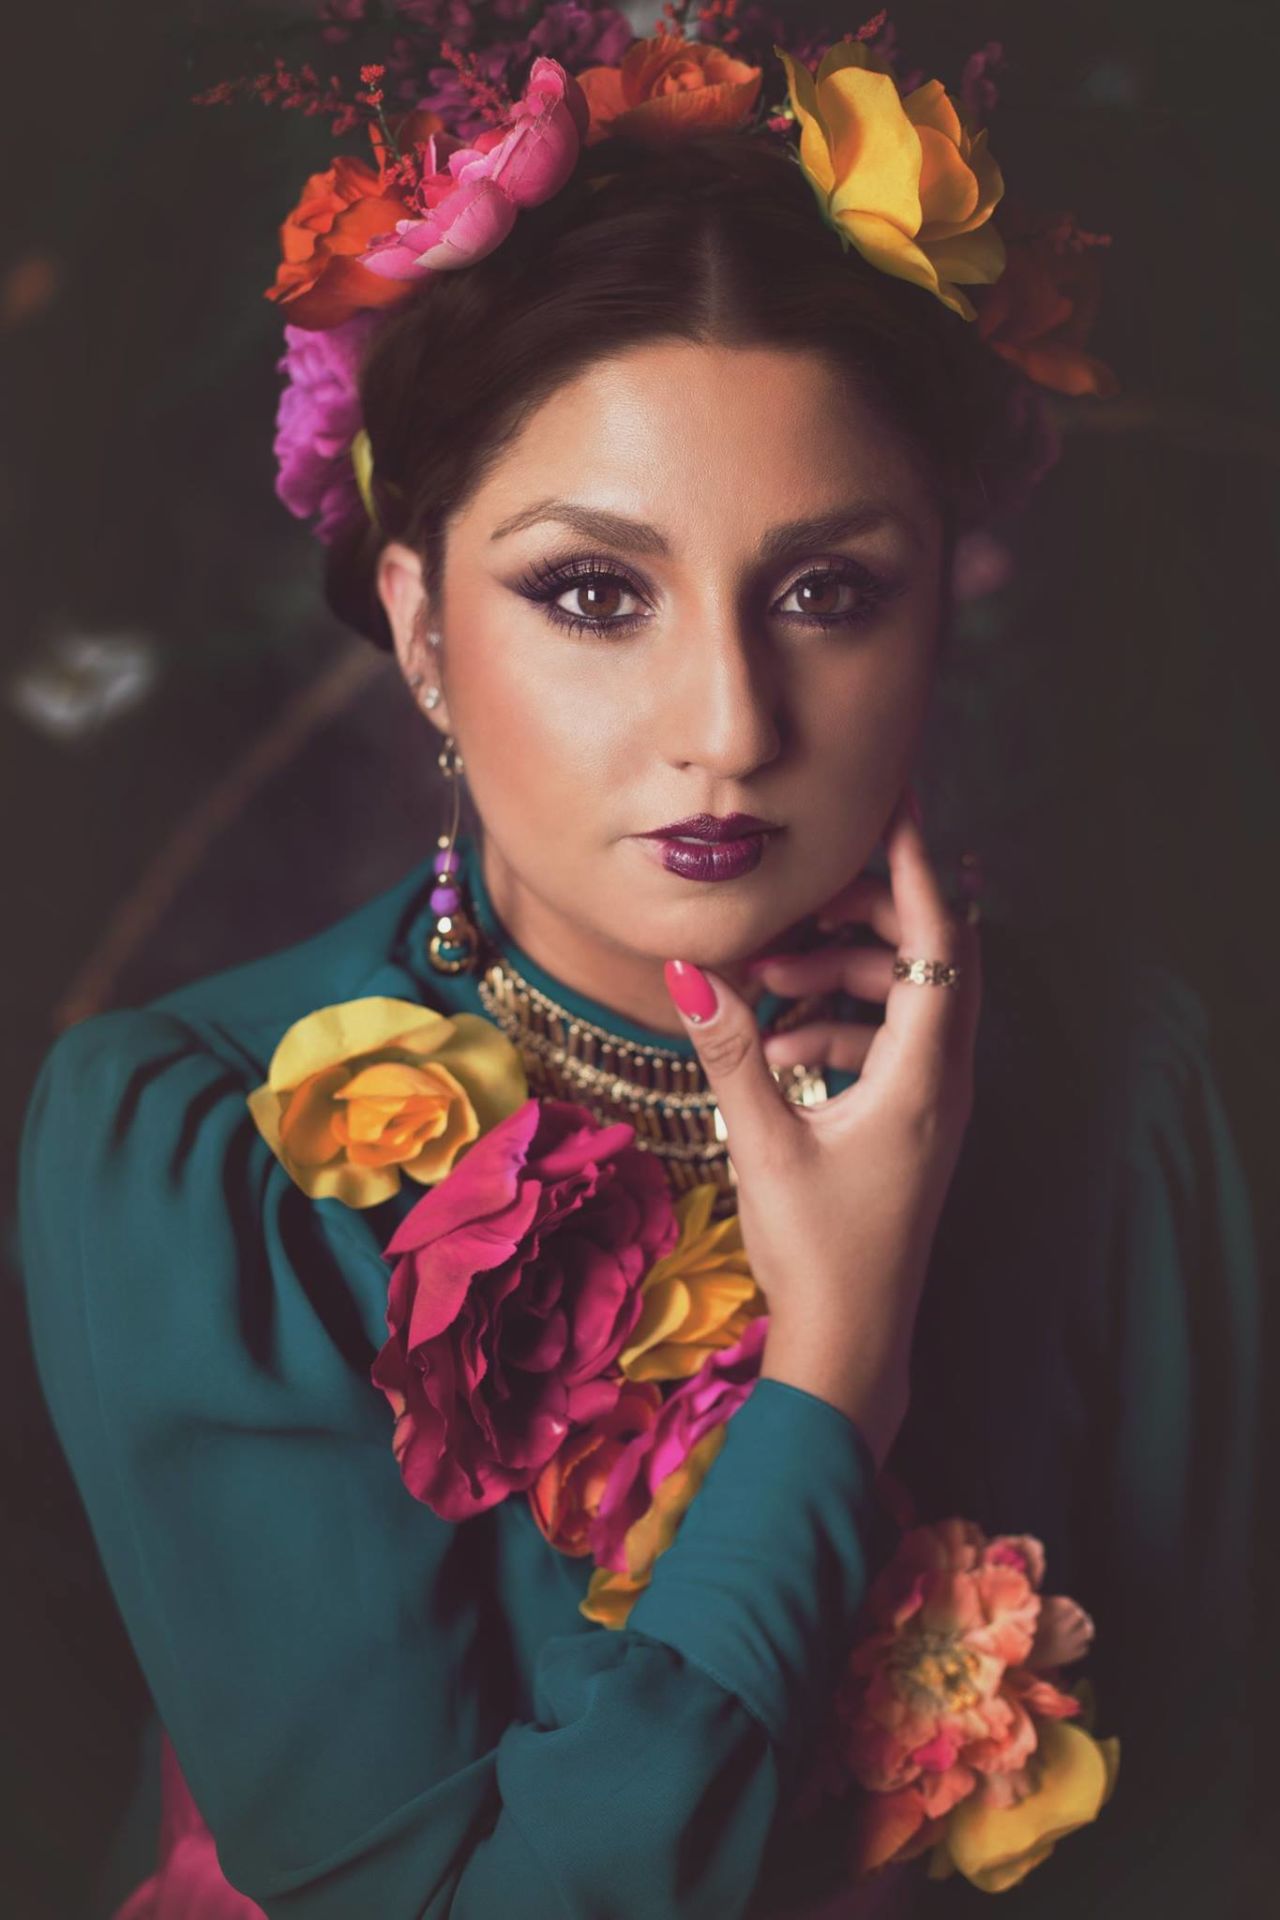 American photographer <a href="https://www.facebook.com/ValerieThompsonPhotography" target="_blank" target="_blank">Valerie Thompson</a> took this photo of her friend Gloria, an artist heavily influenced by the imagery of Frida Kahlo, using a softer focus.